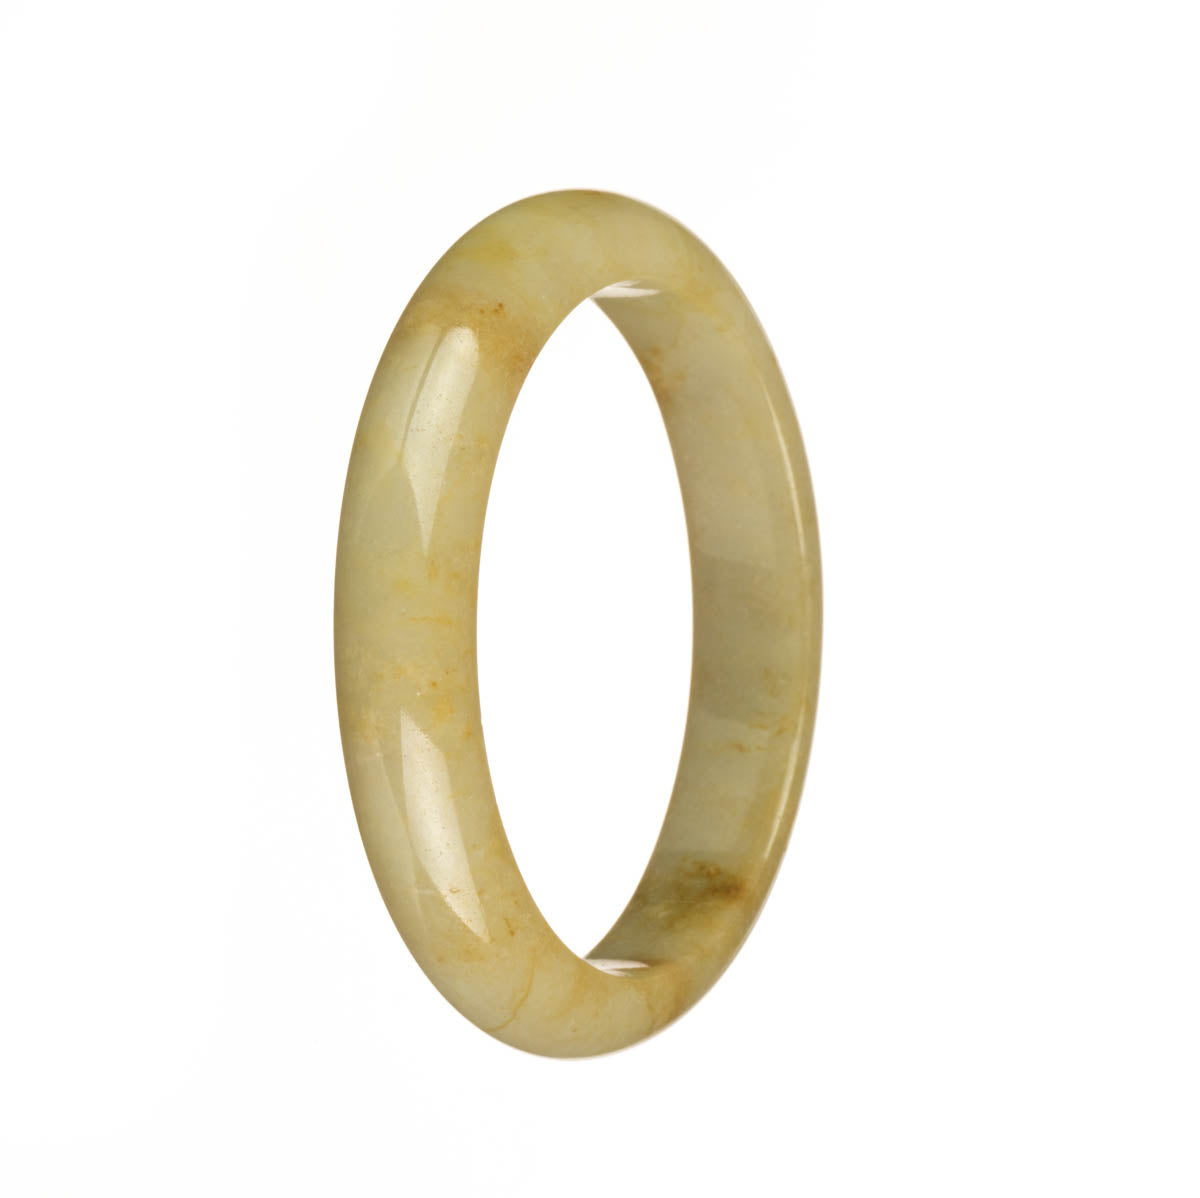 Image of a half-moon shaped yellow jade bangle with a smooth and glossy surface. The bangle is made of authentic grade A traditional jade, showcasing its stunning natural color and unique texture. A timeless piece of jewelry handcrafted by MAYS GEMS.